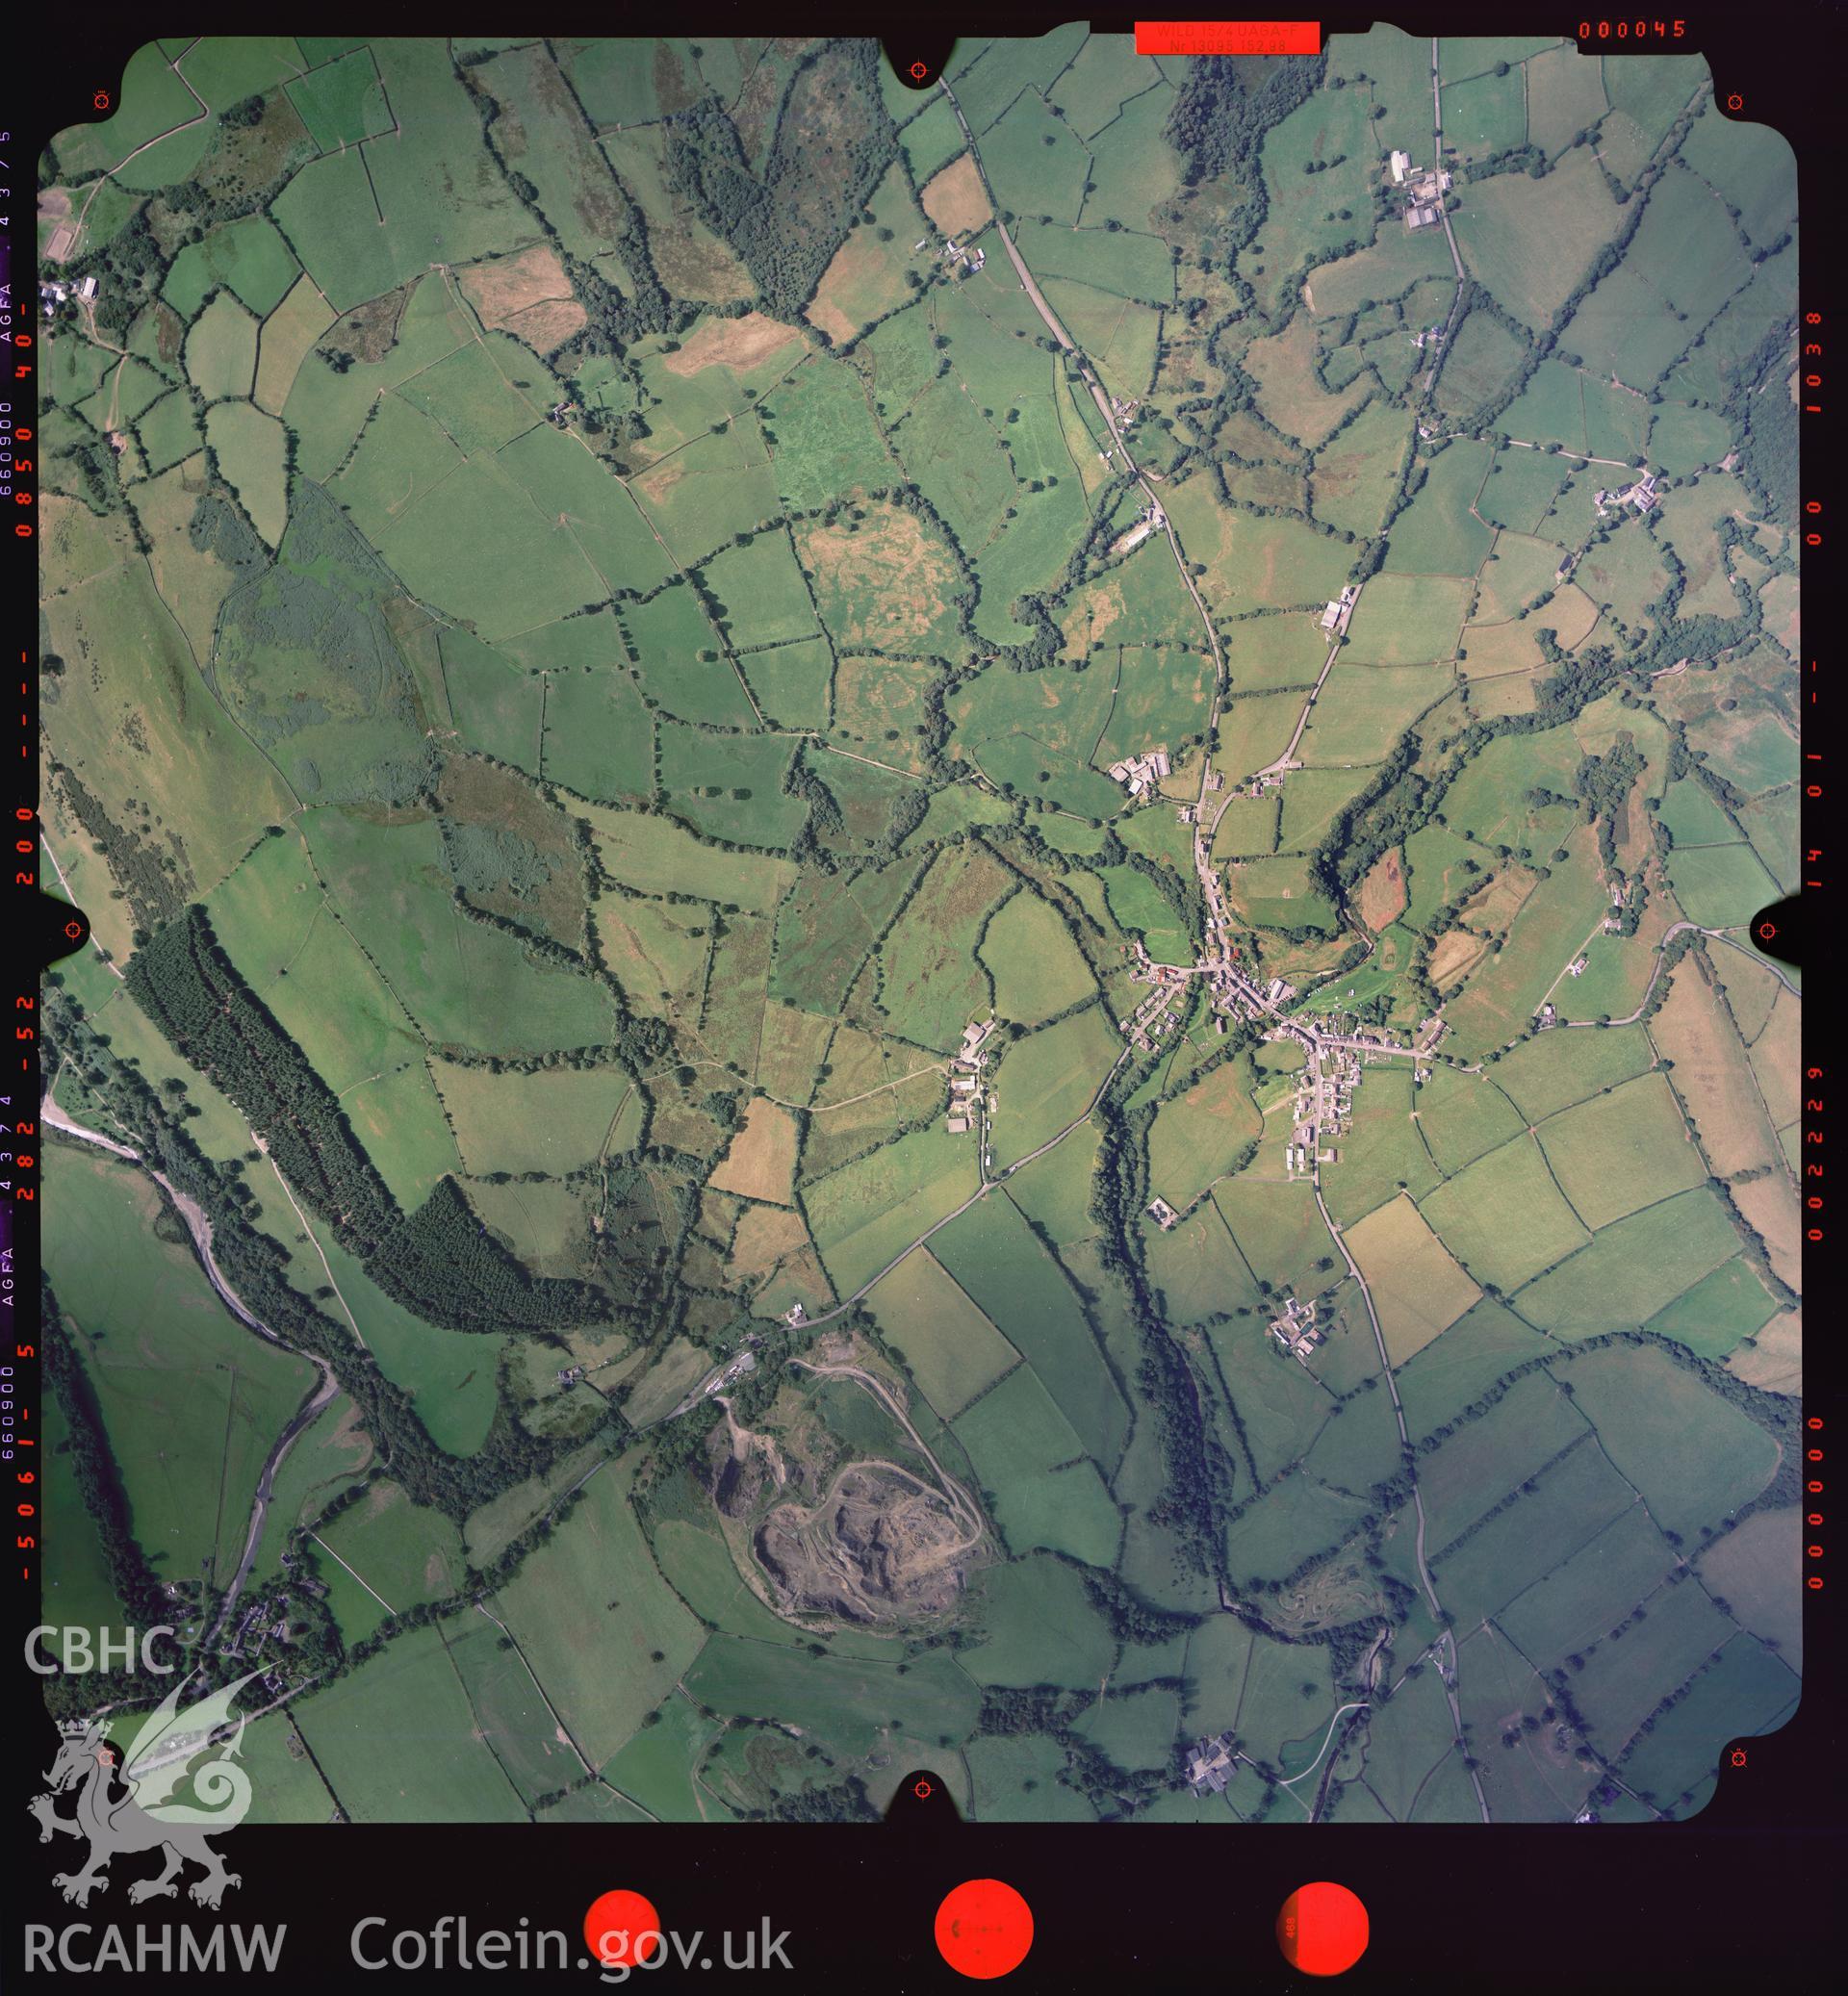 Digitized copy of a colour aerial photograph showing the area around Llansawel, taken by Ordnance Survey, 2003.